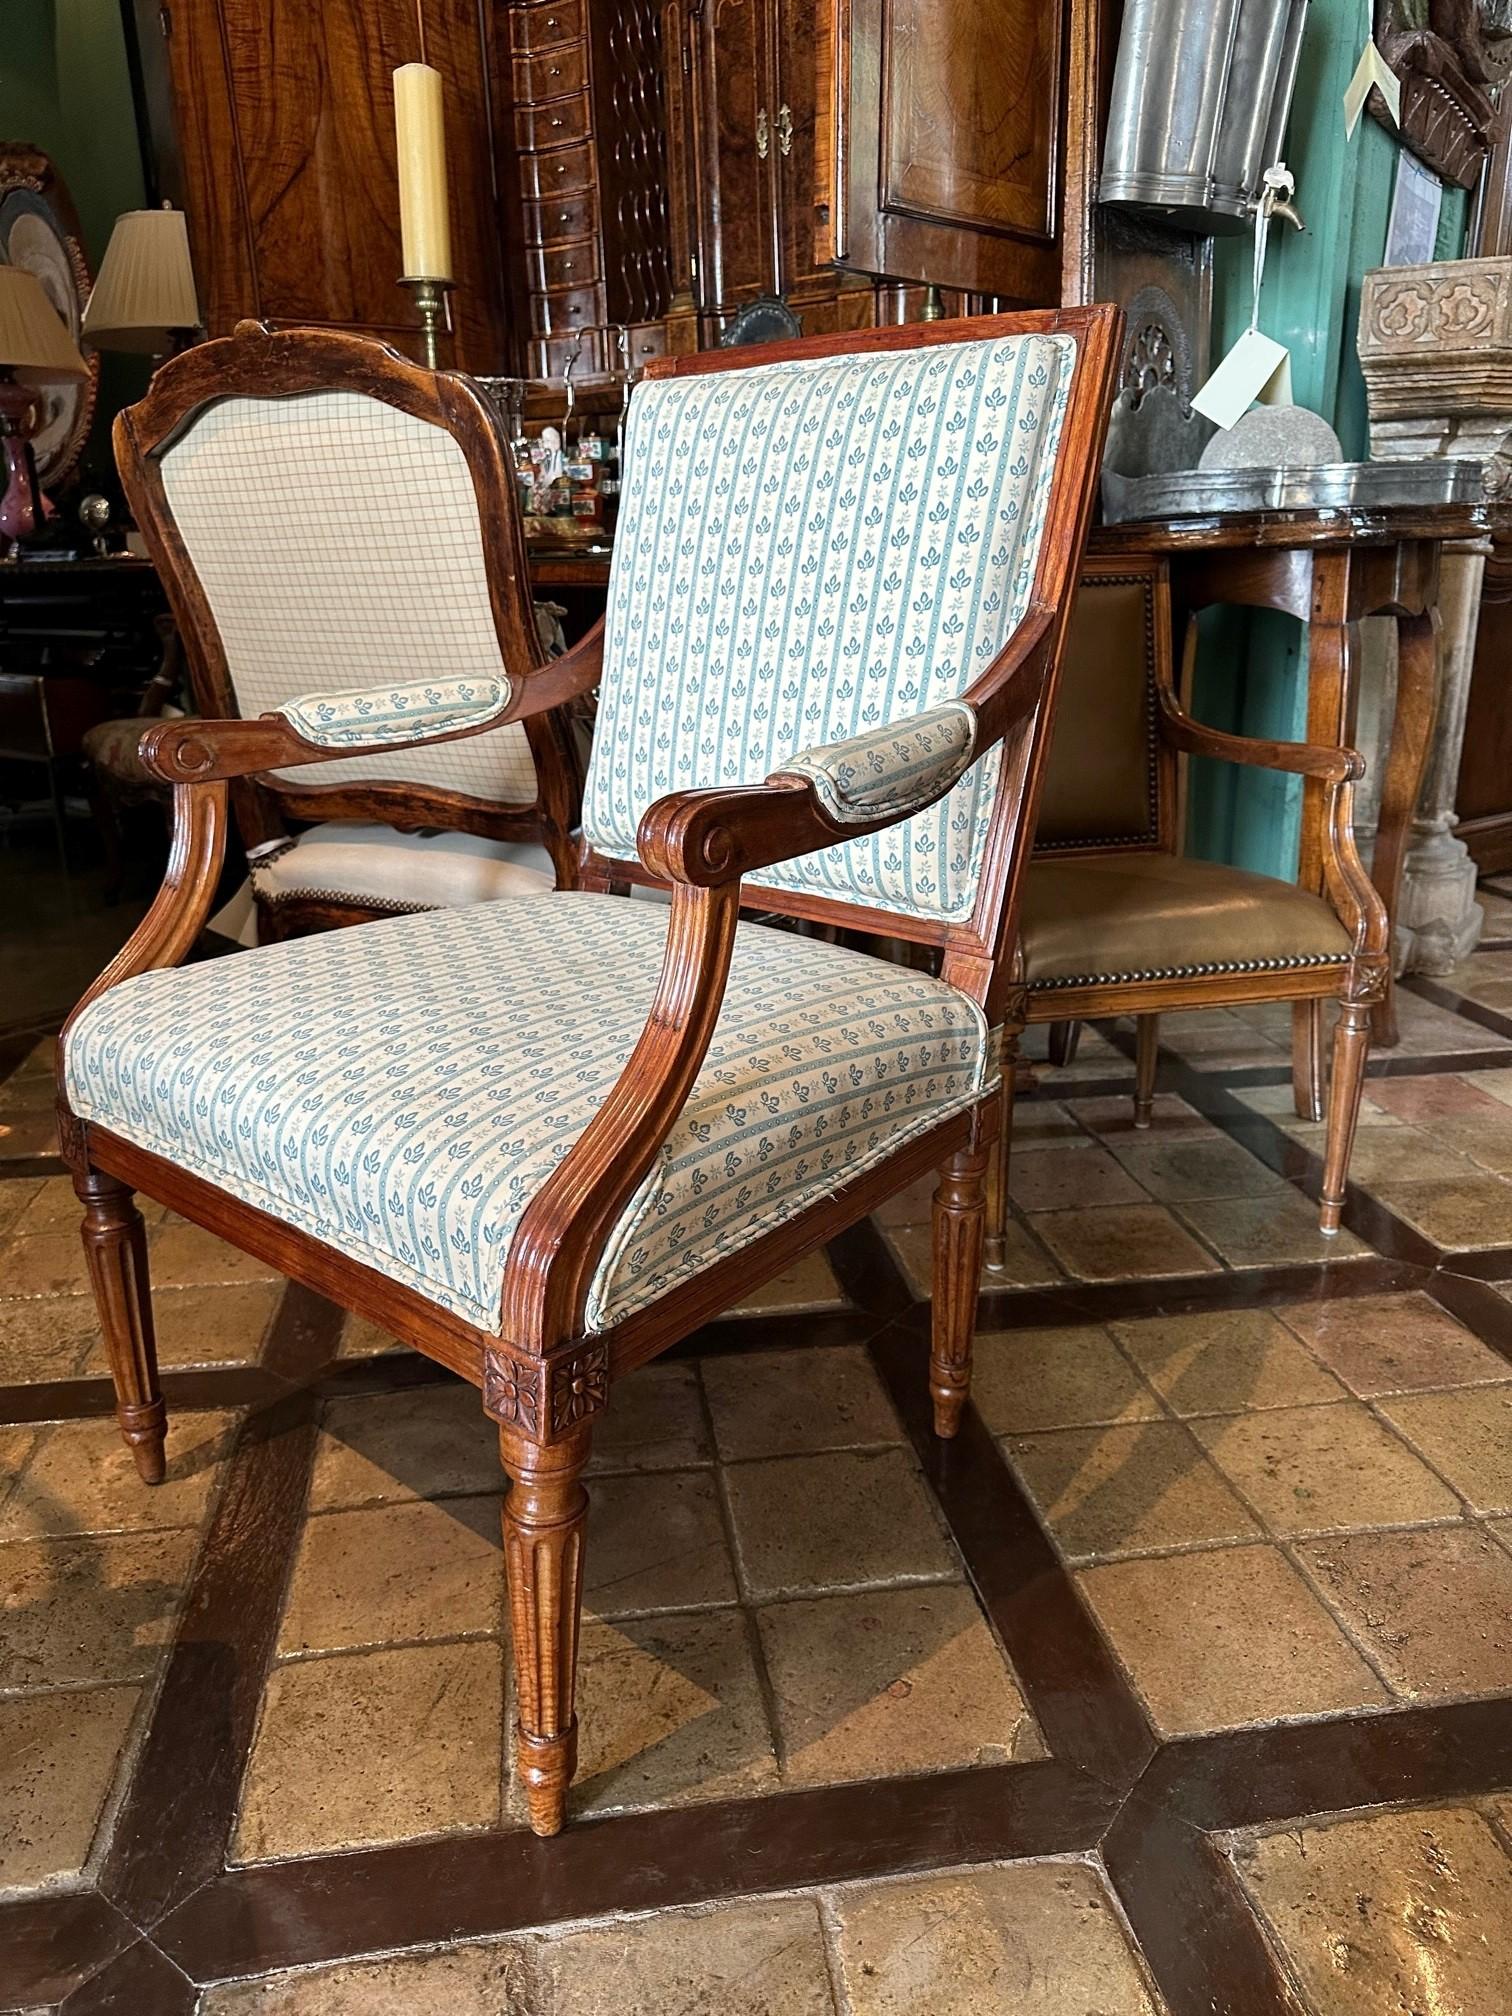 Pair Antique Armchairs Louis XVI Fauteuils in Walnut Dining Entrance Side chairs. Two chairs out of a (Set of Six total) important 18th century Louis XVI of the Period French Chairs. Carved beautifully in Walnut and a fantastic patina. Upholstered